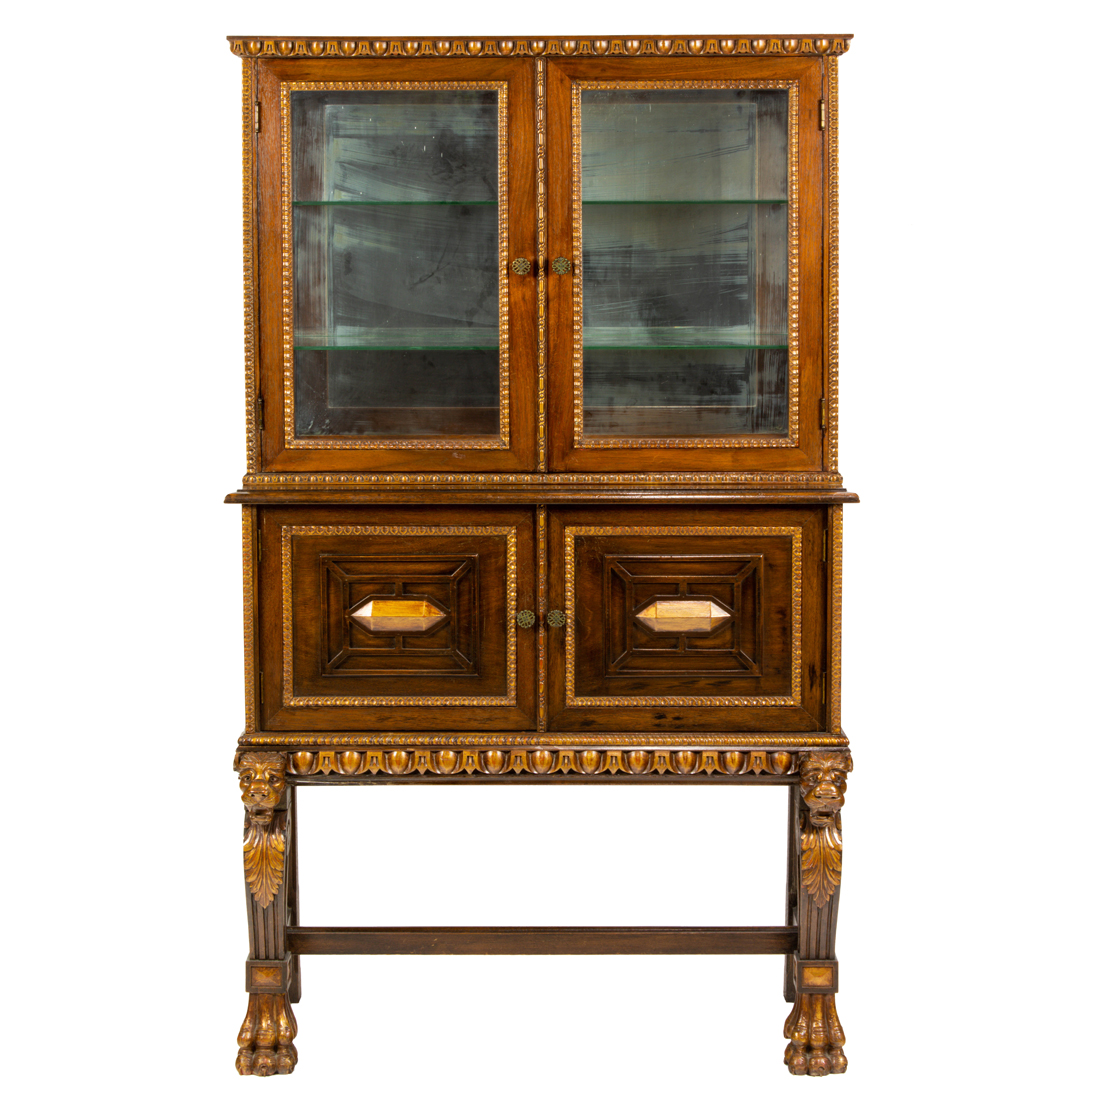 A SPANISH REVIVAL DISPLAY CASE